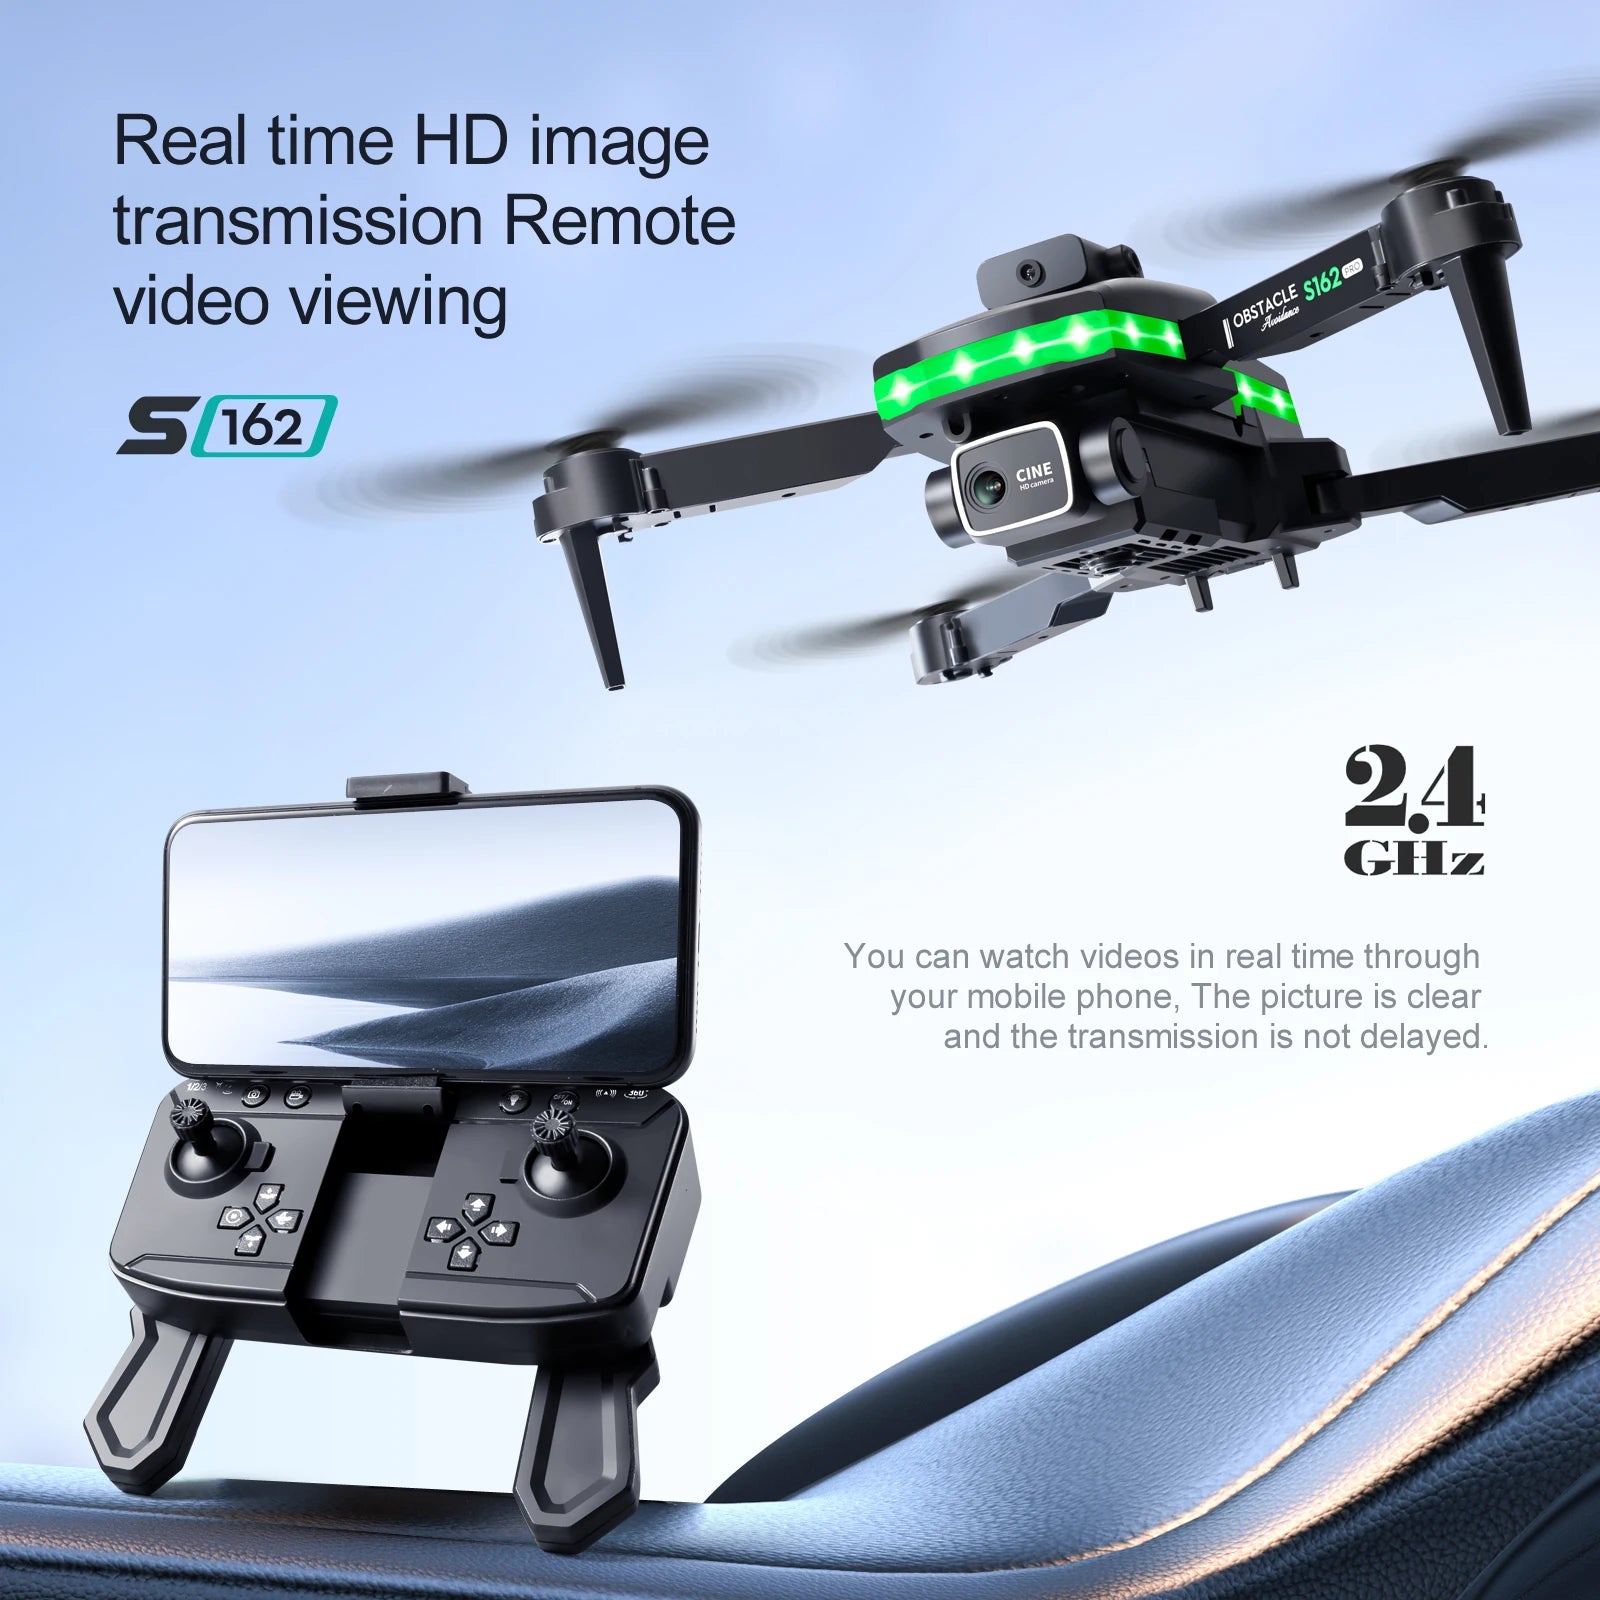 S162 Pro Drone, real time hd image transmission remote video viewing 5 162 24